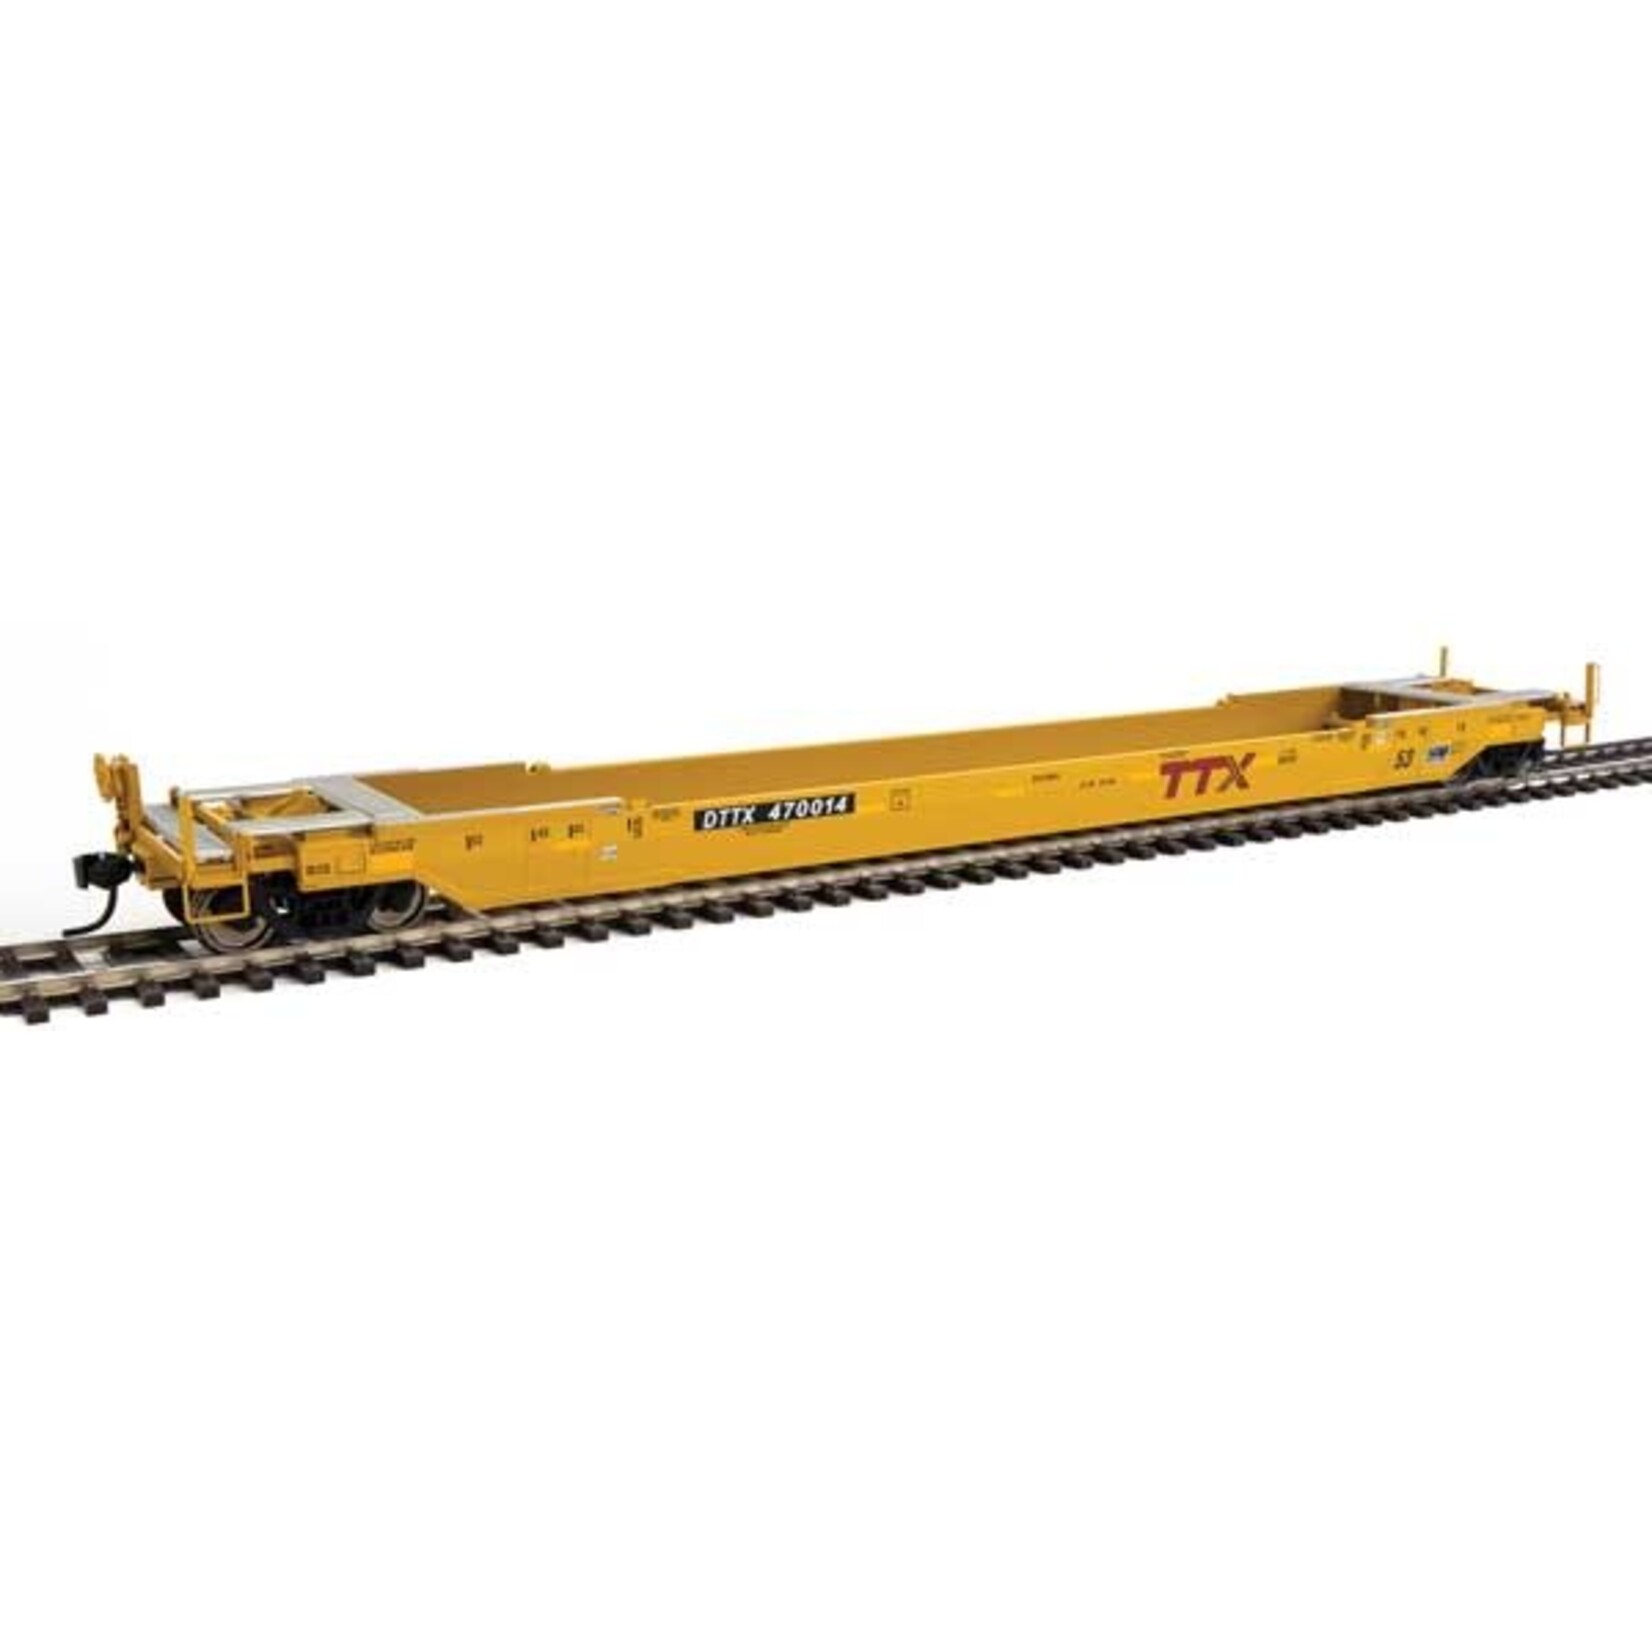 Walthers Gunderson Rebuilt All-Purpose 53' Well Car -  DTTX #470014 (yellow, large red logo)